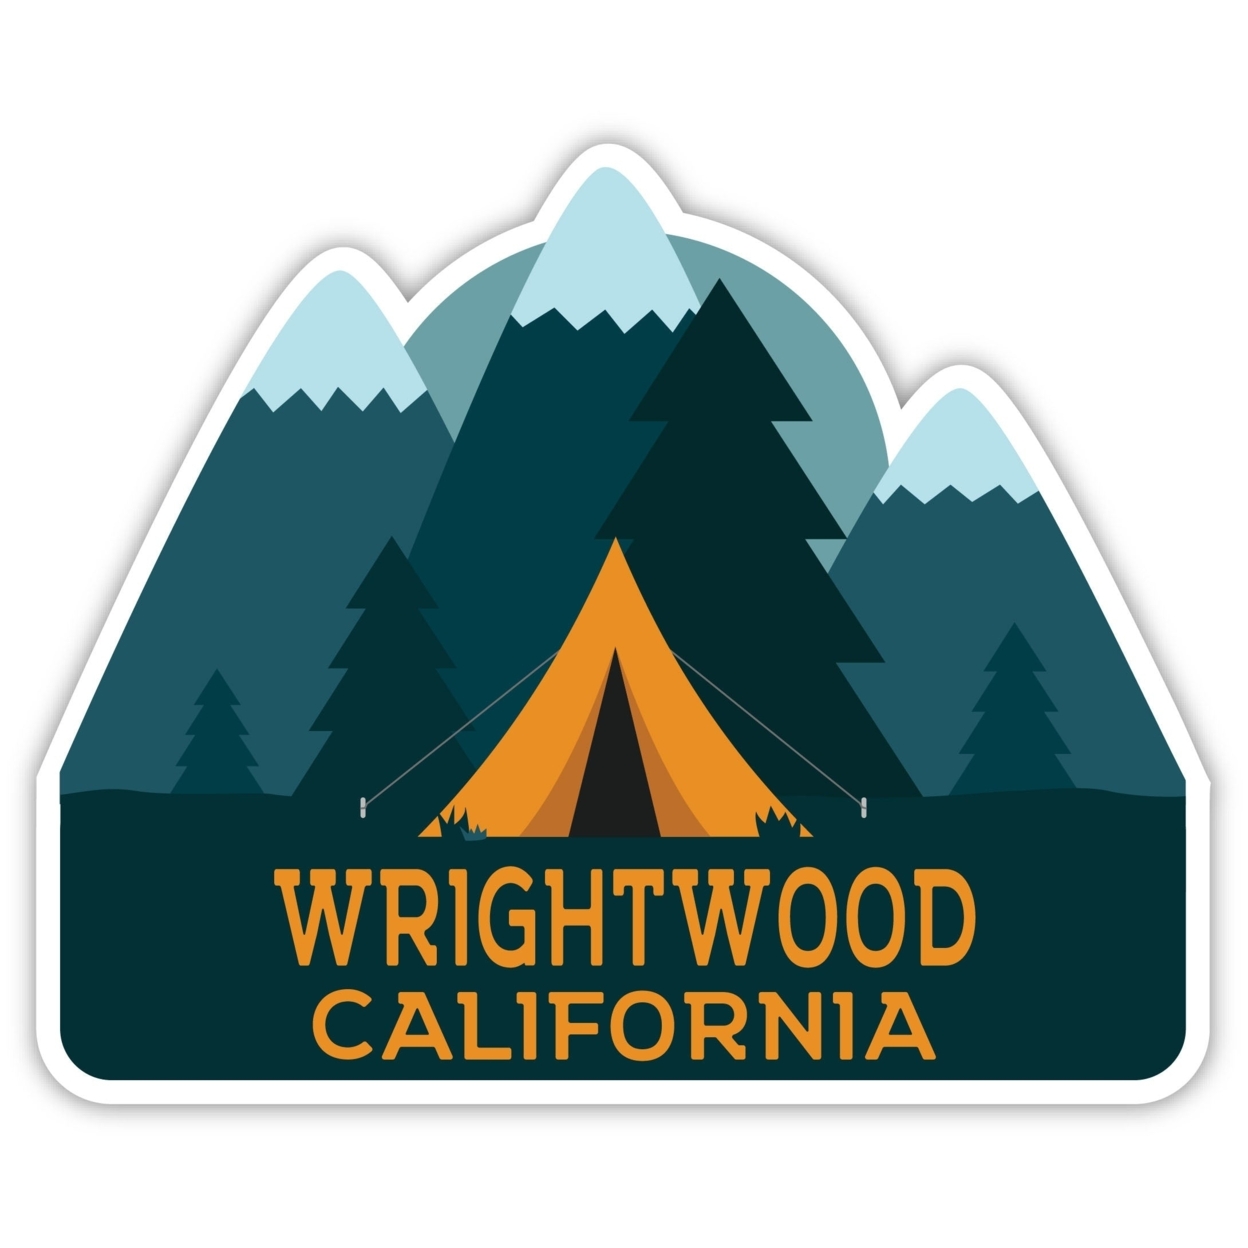 Wrightwood California Souvenir Decorative Stickers (Choose Theme And Size) - Single Unit, 2-Inch, Tent